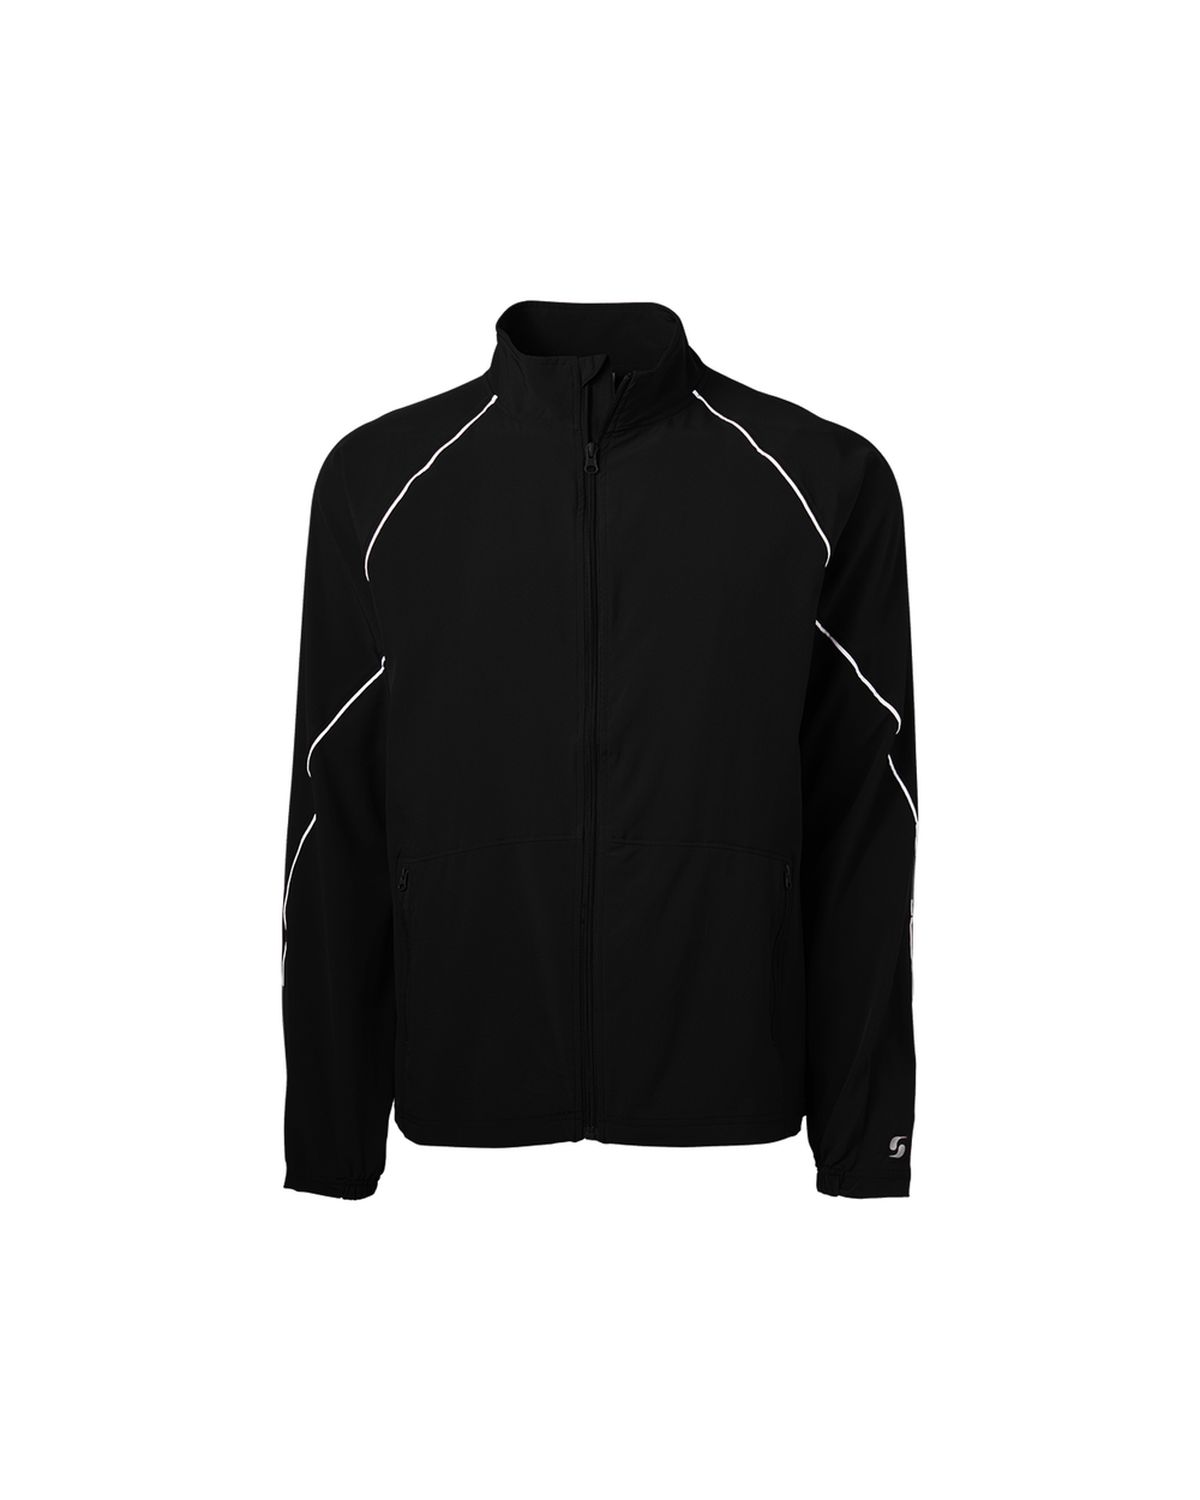 'Soffe 1026M Game Time Warm Up Jacket'